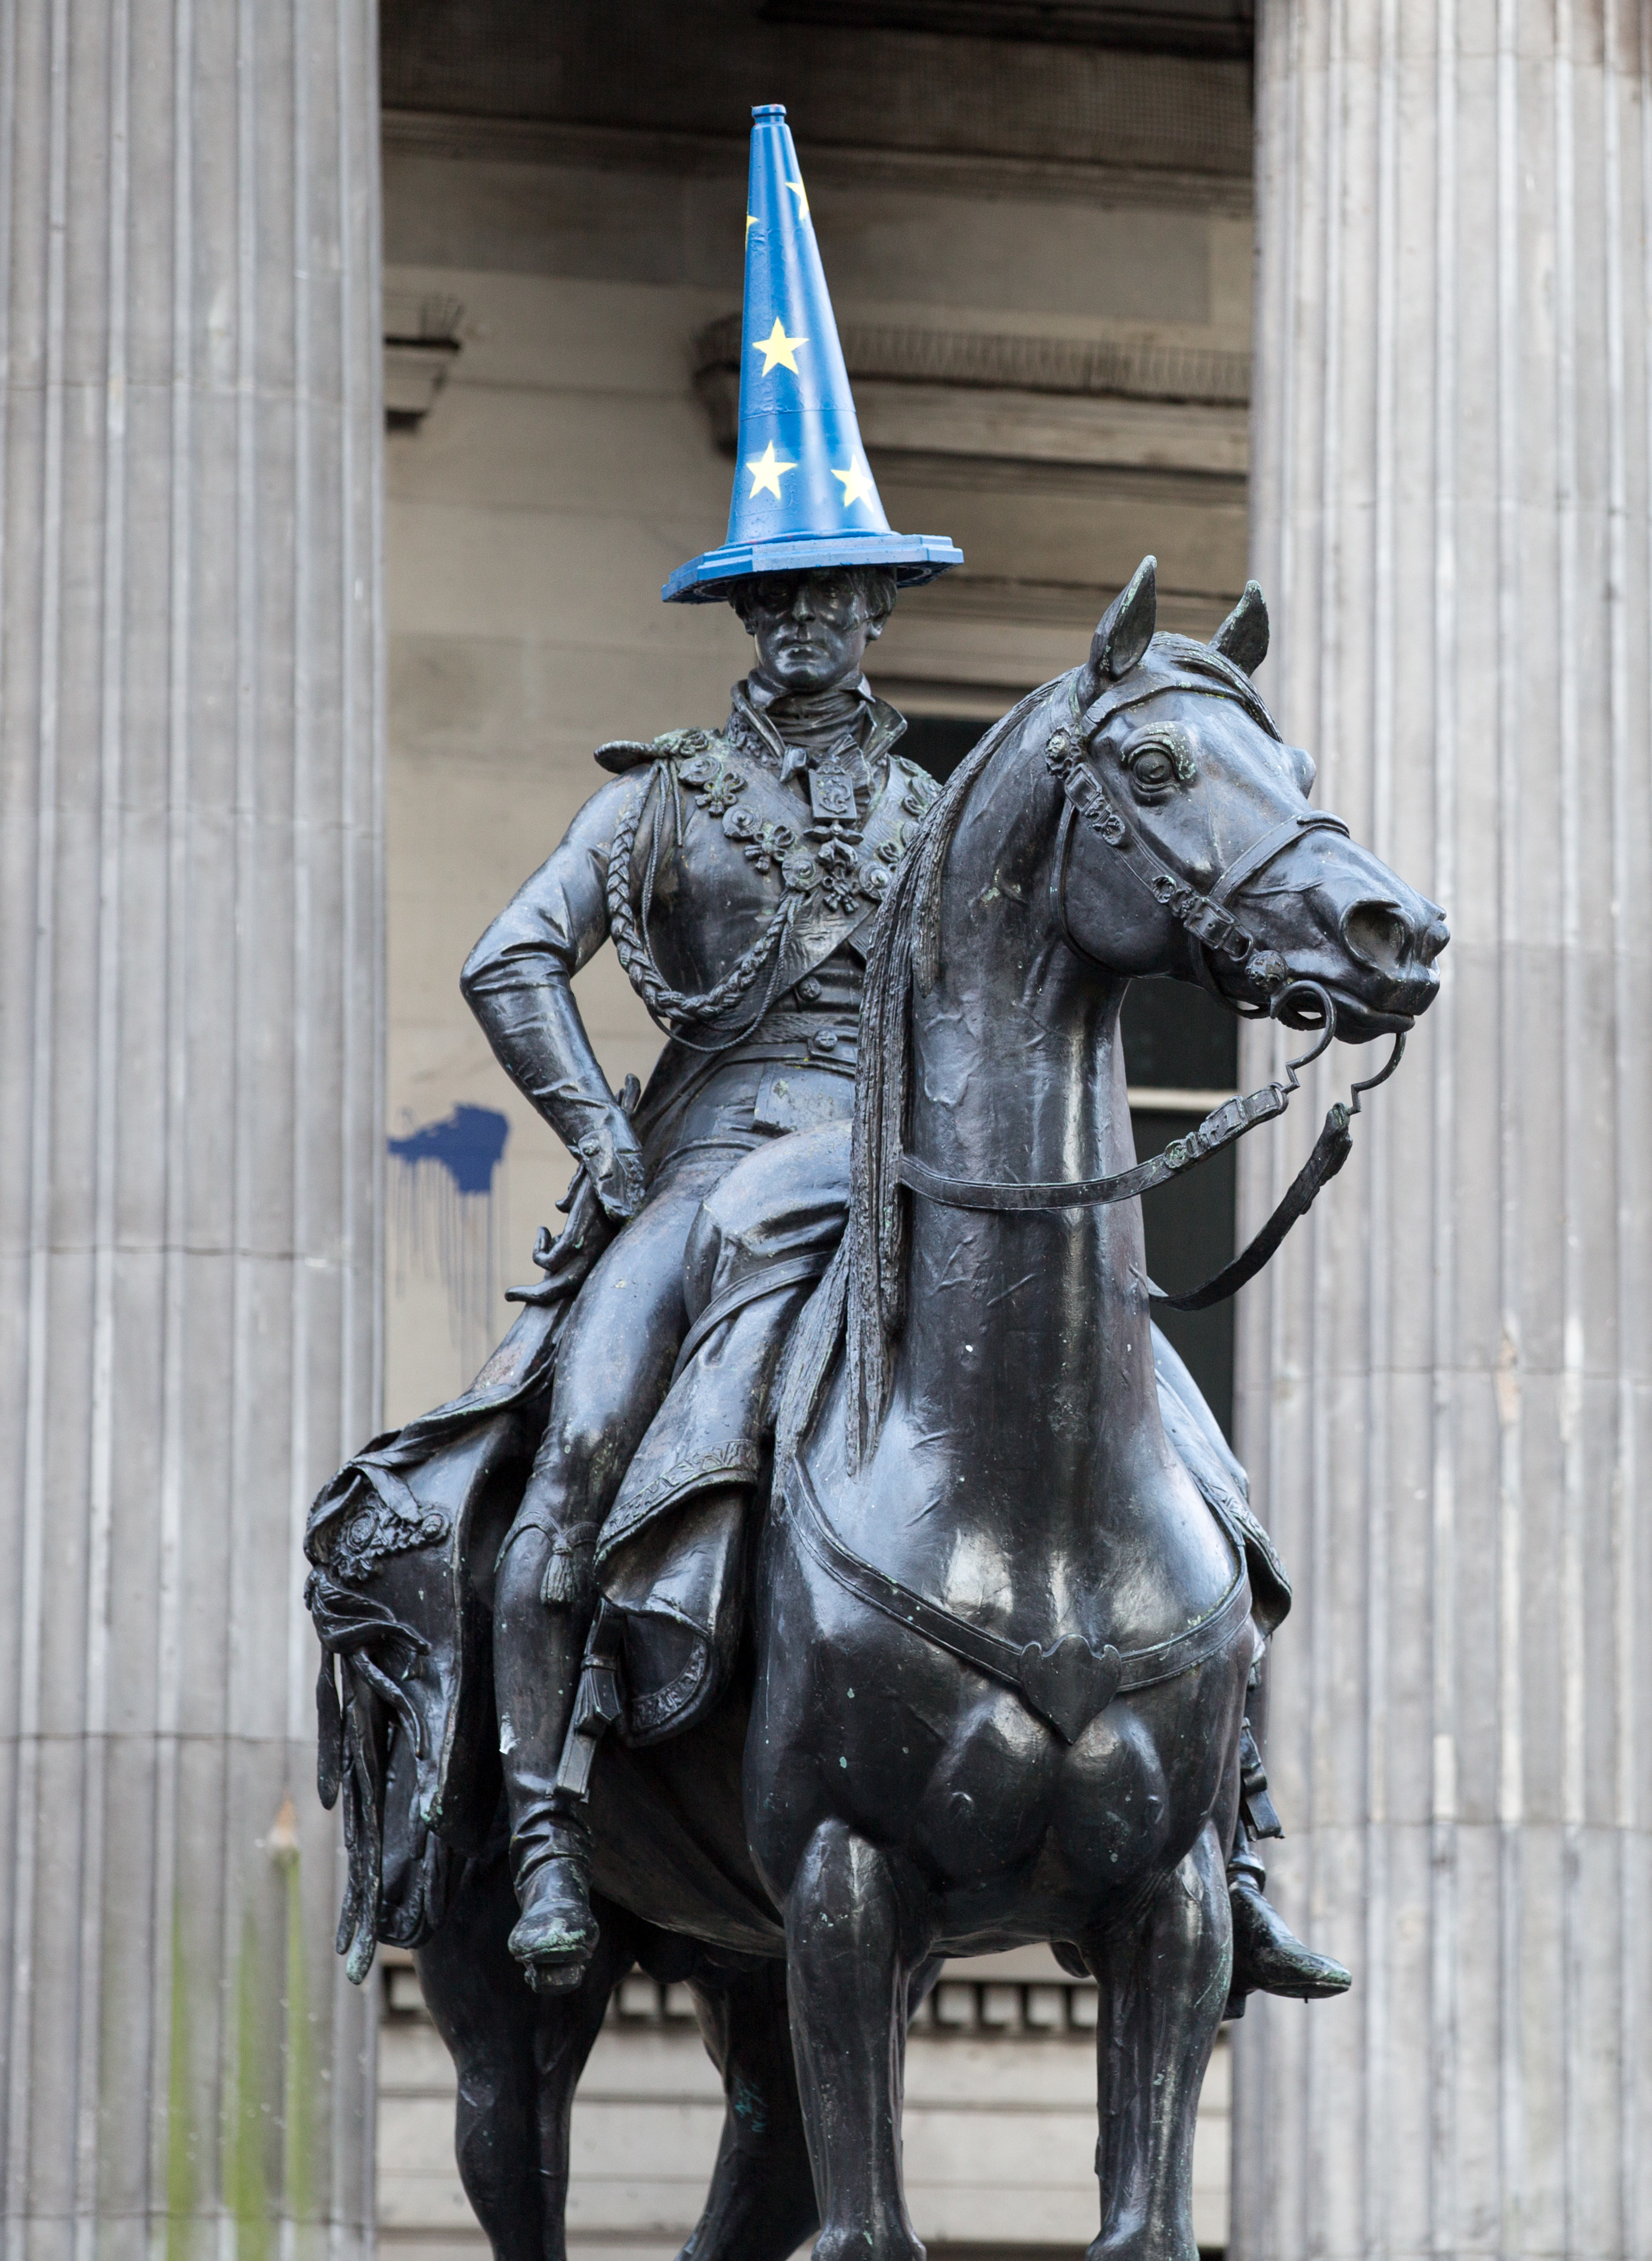 The iconic equestrian Duke of Wellington statue on Royal Exchange Square outside the Gallery of Modern Art (GOMA) sports an EU flag traffic cone on February 3, 2020